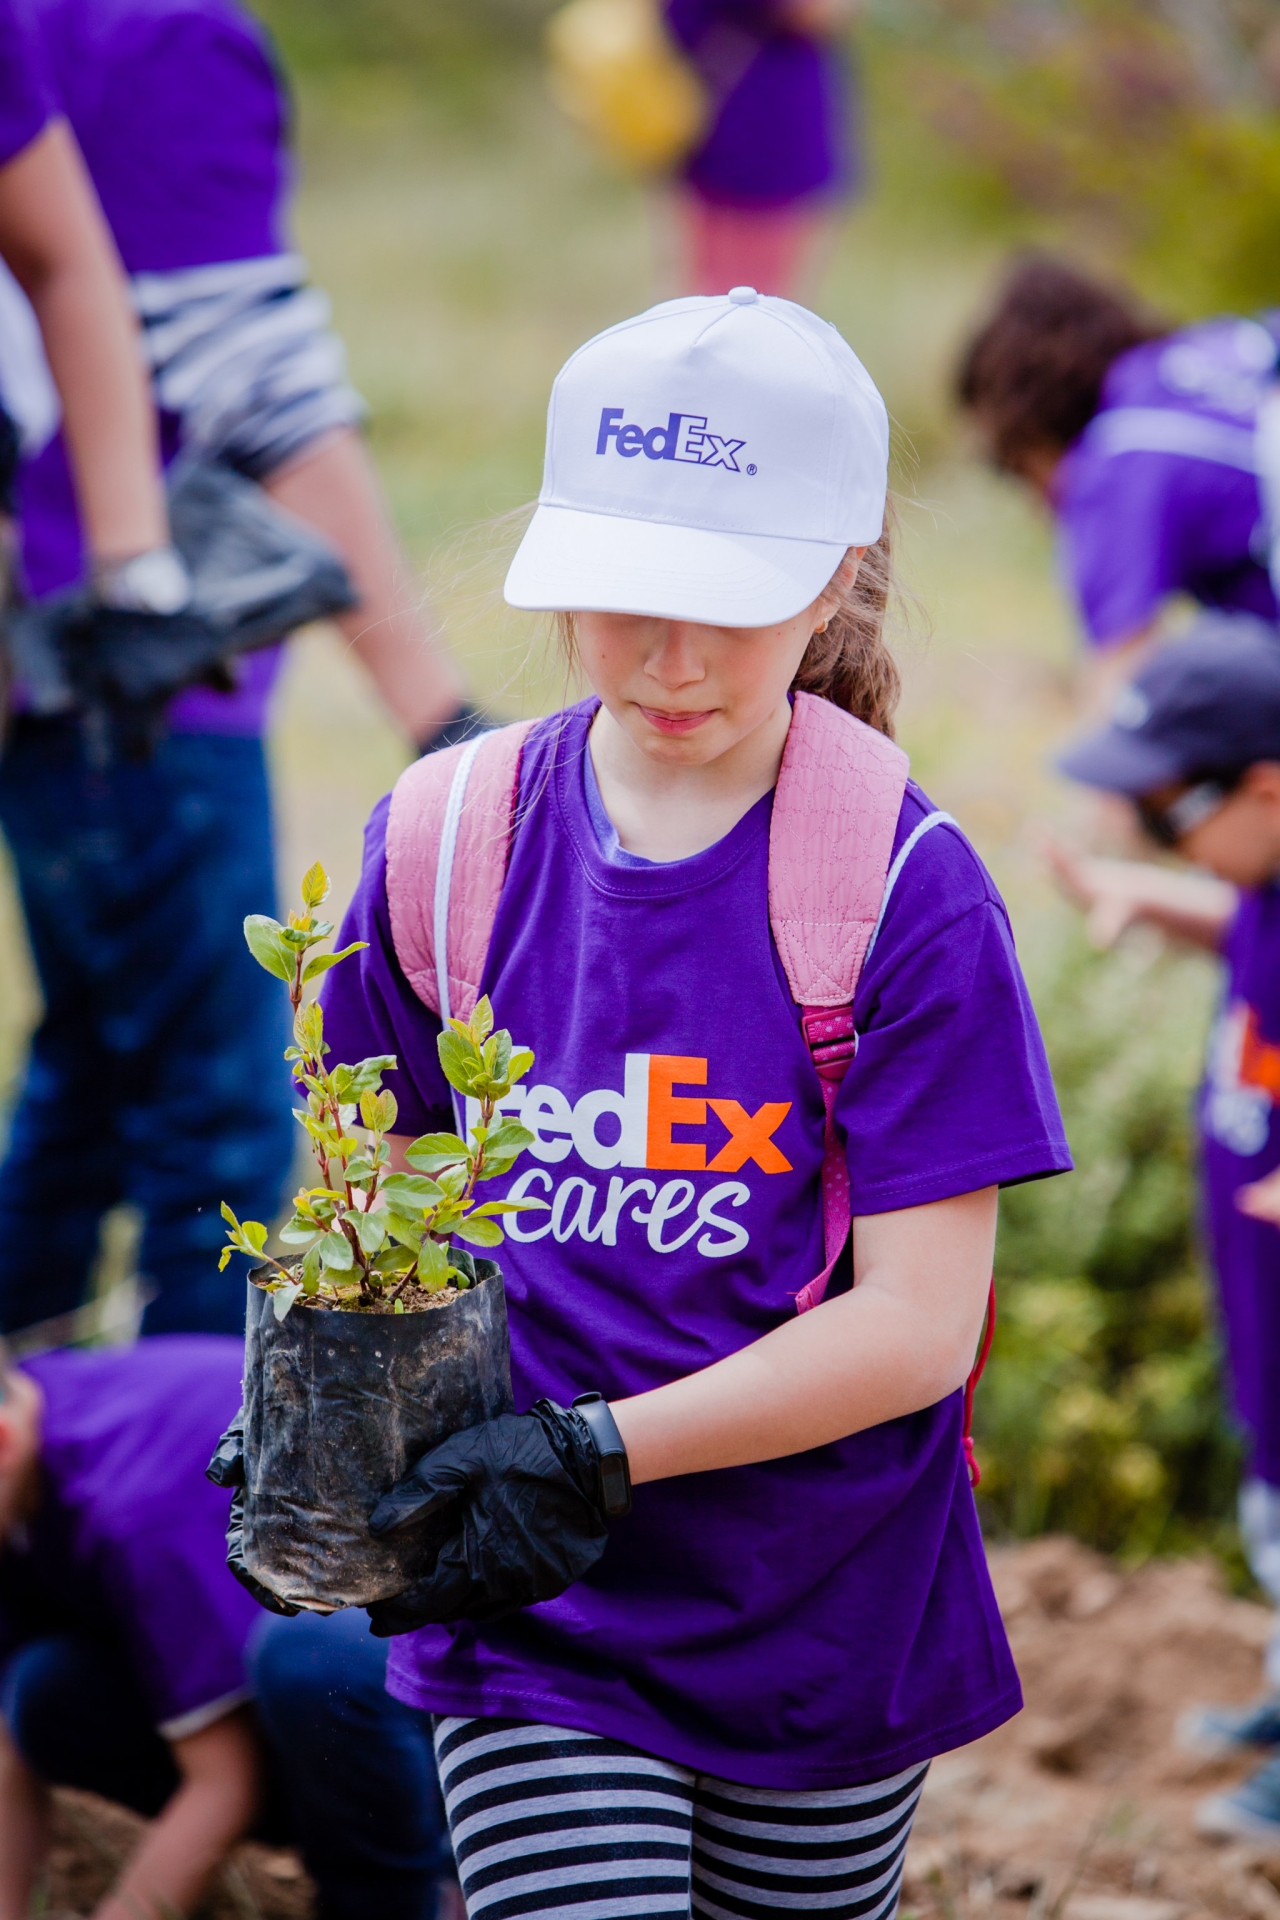 Child wearing a FedEx t-shirt and carrying a plant